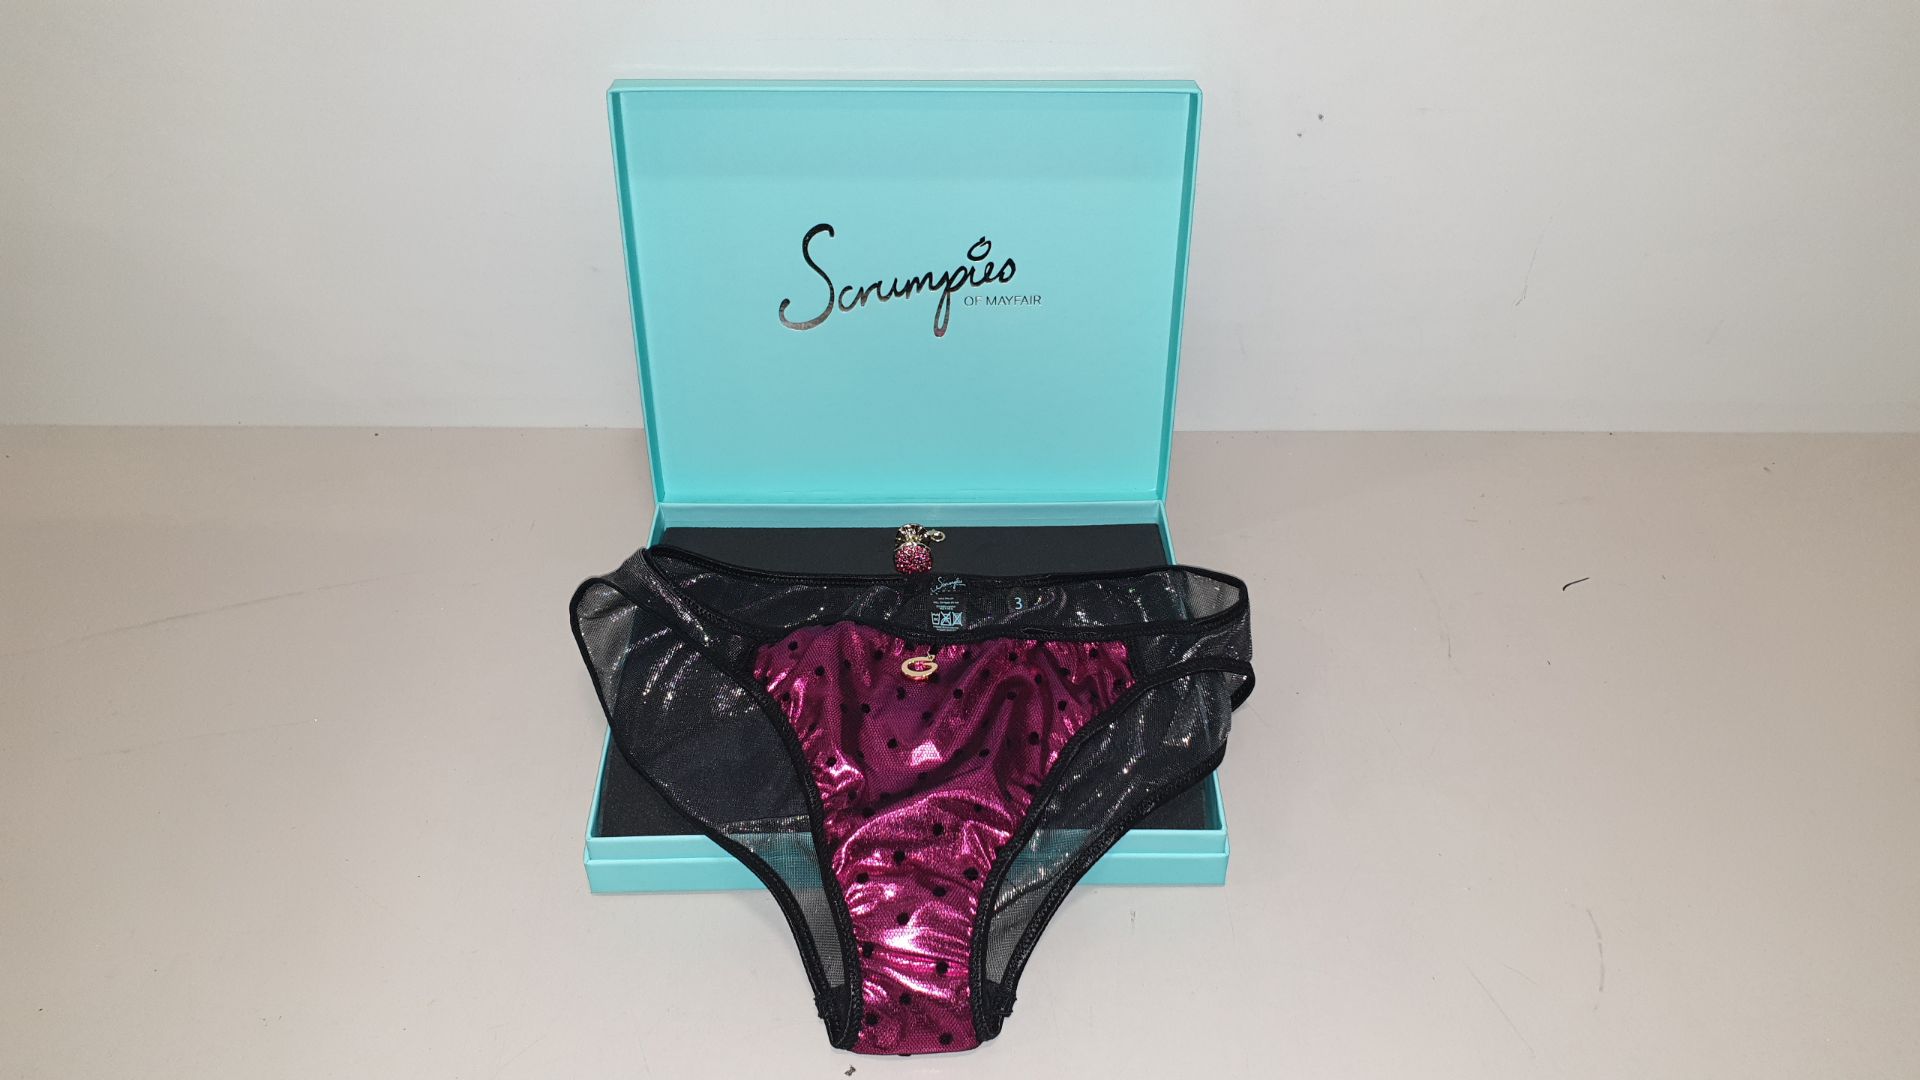 50 X SCRUMPIES OF MAYFAIR GARDEN PINK LADY TANGA BRIEFS - SIZES 8-16 (1-5) WITH BAG OF 50 CHARMS AND